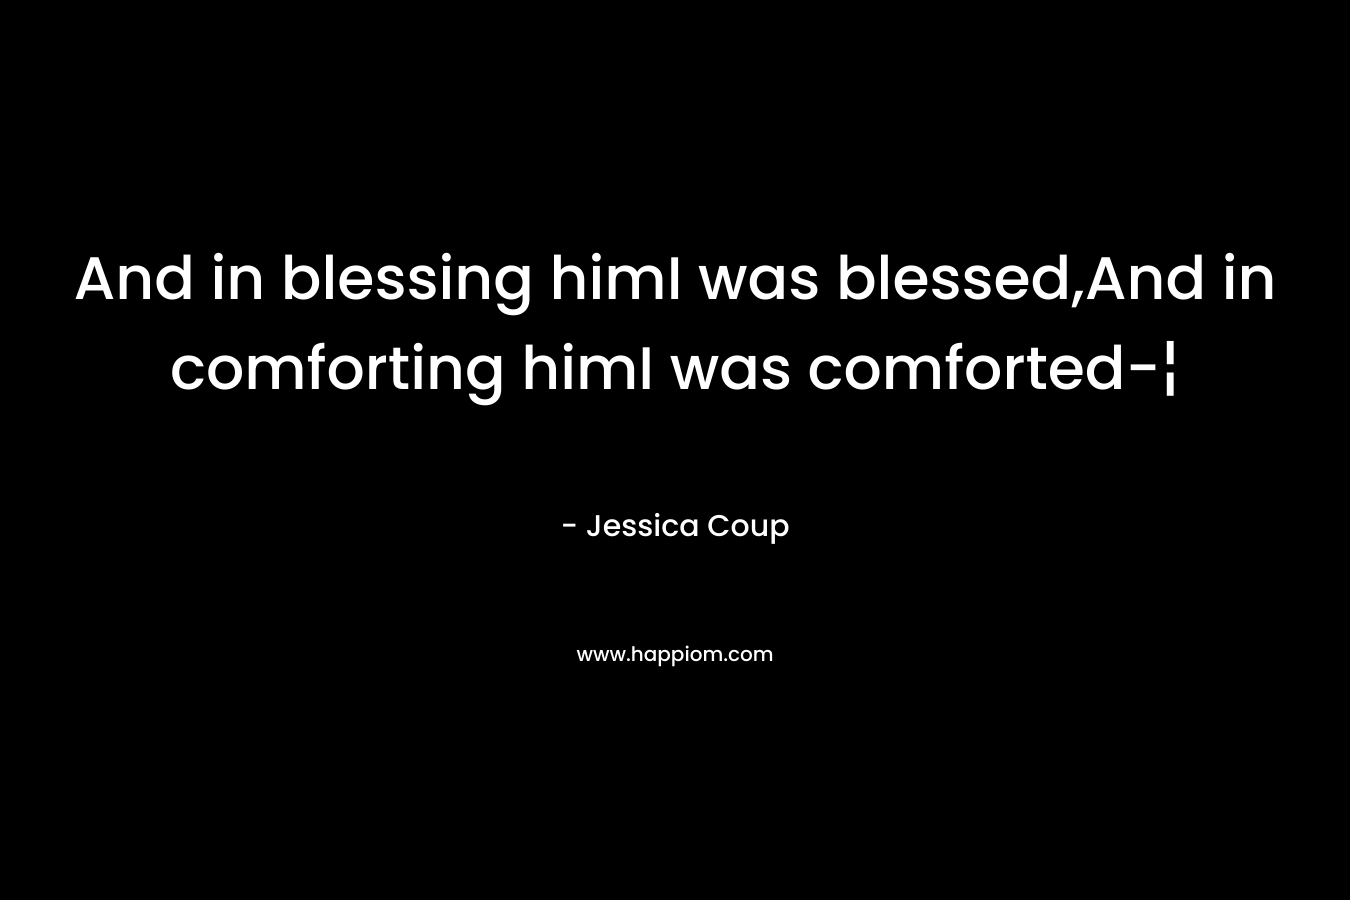 And in blessing himI was blessed,And in comforting himI was comforted-¦